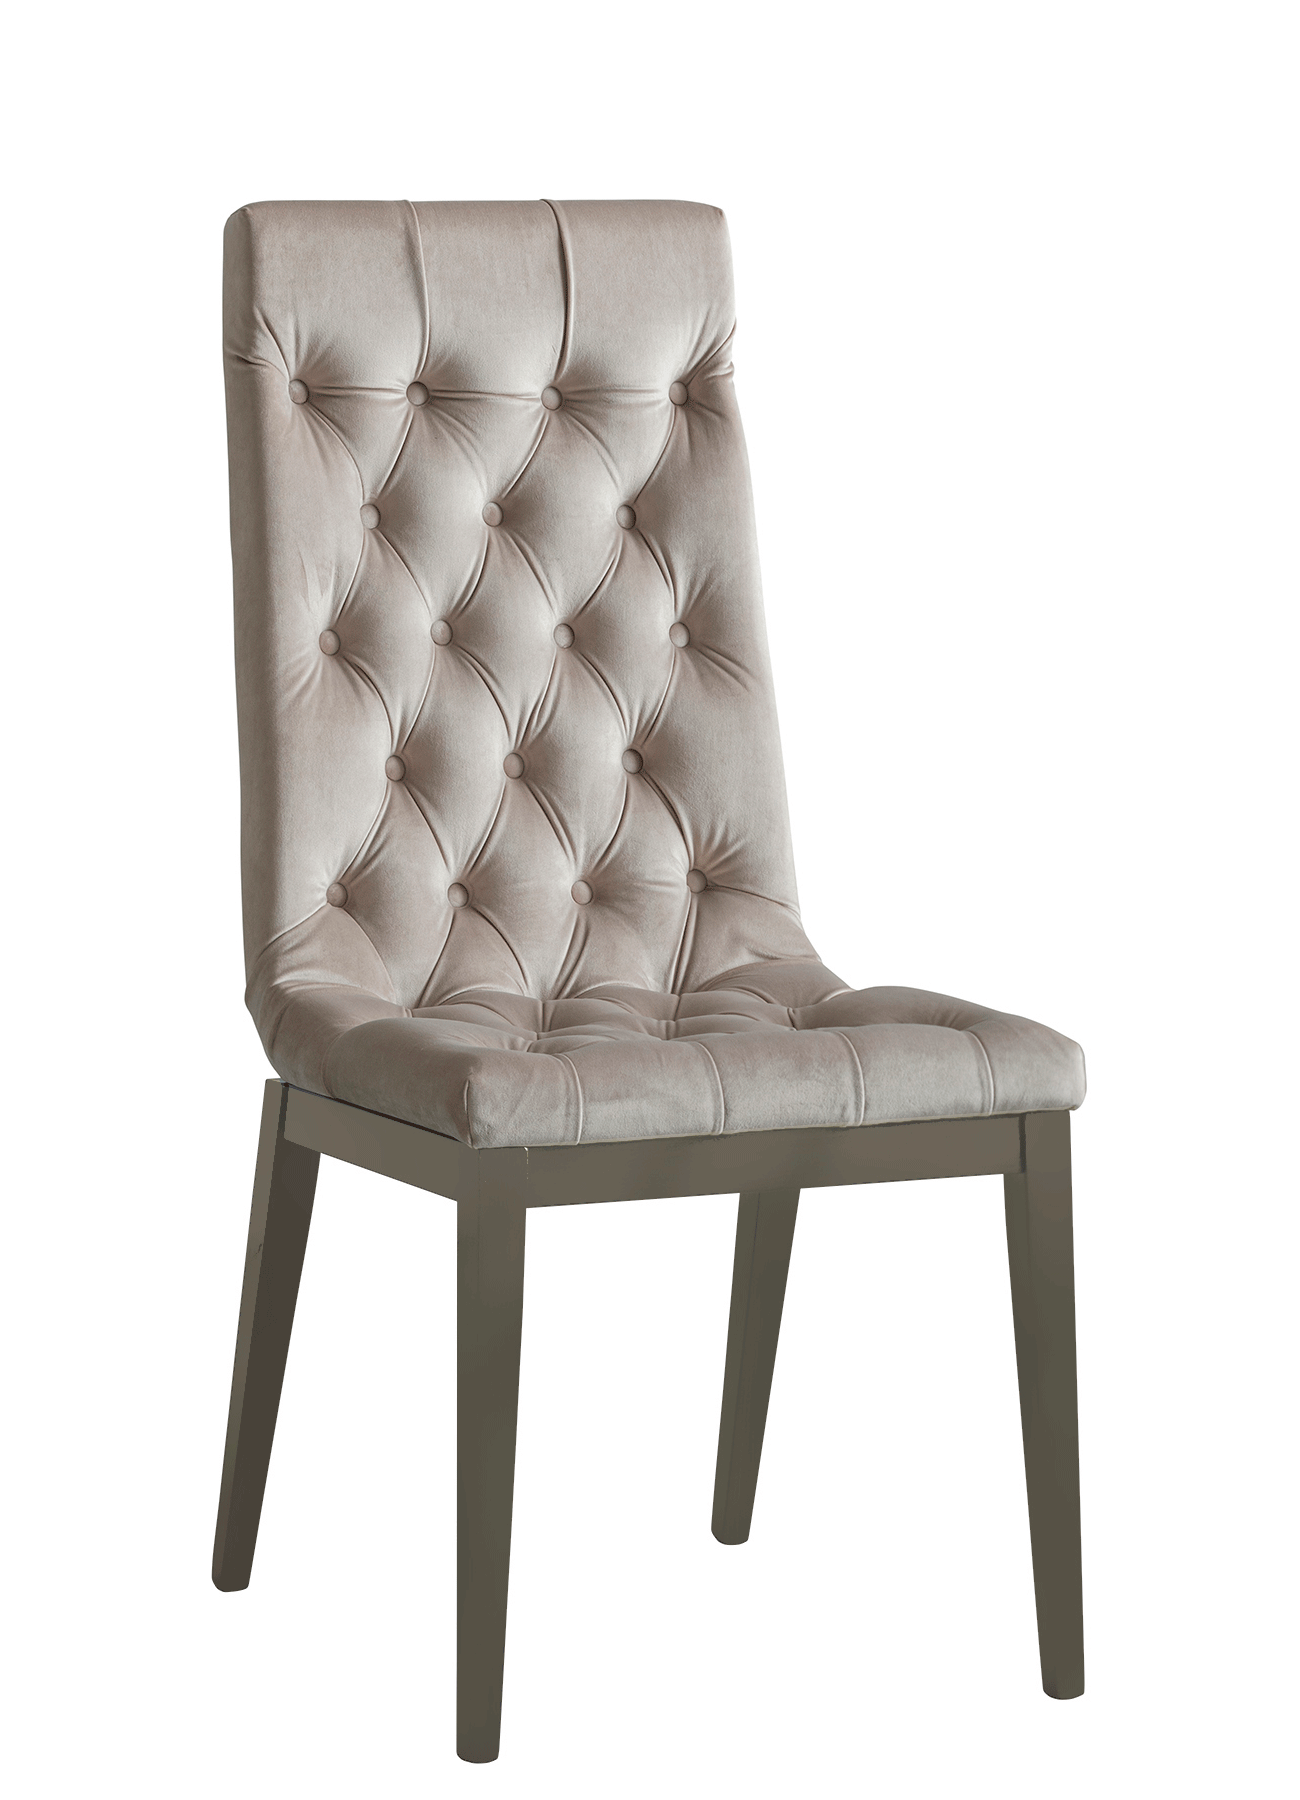 Brands Camel Classic Collection, Italy Volare chair GREY